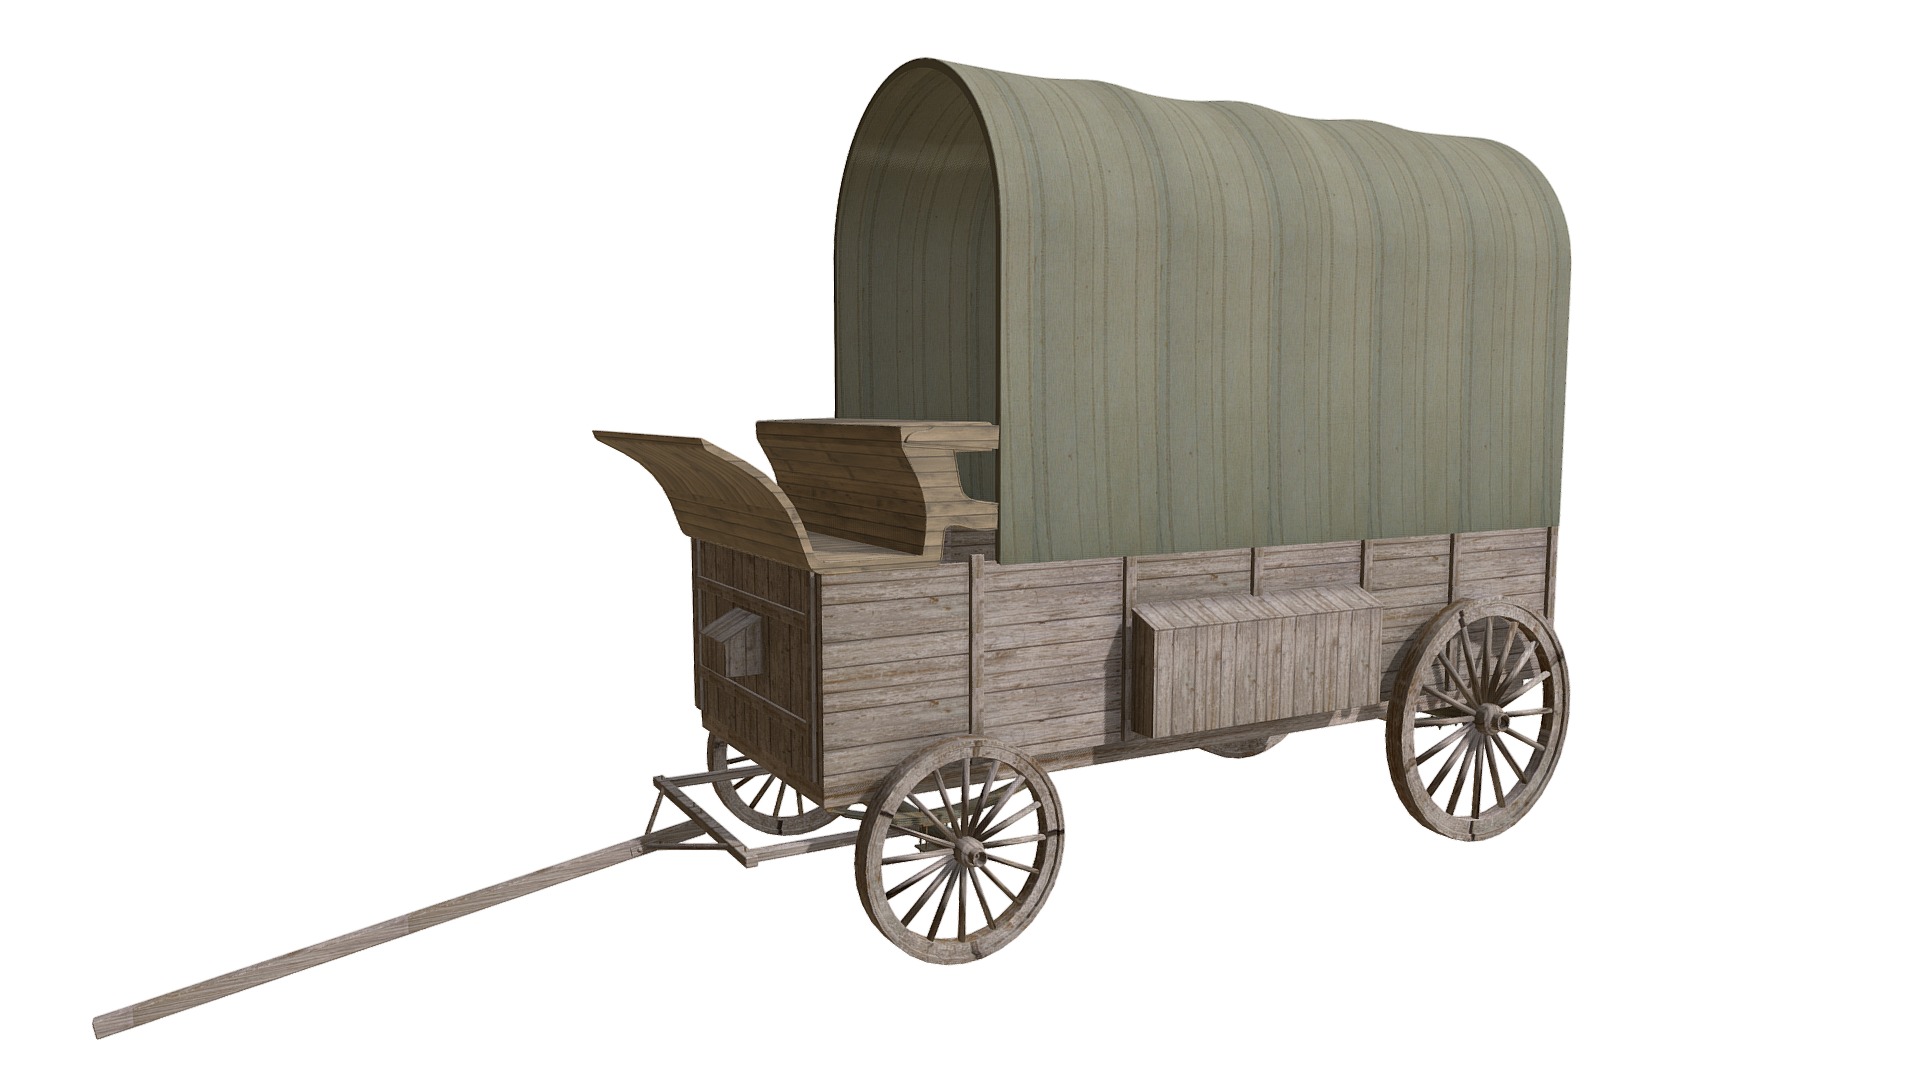 3D model Horse Carriage - This is a 3D model of the Horse Carriage. The 3D model is about a wooden cart with a wooden wheel.